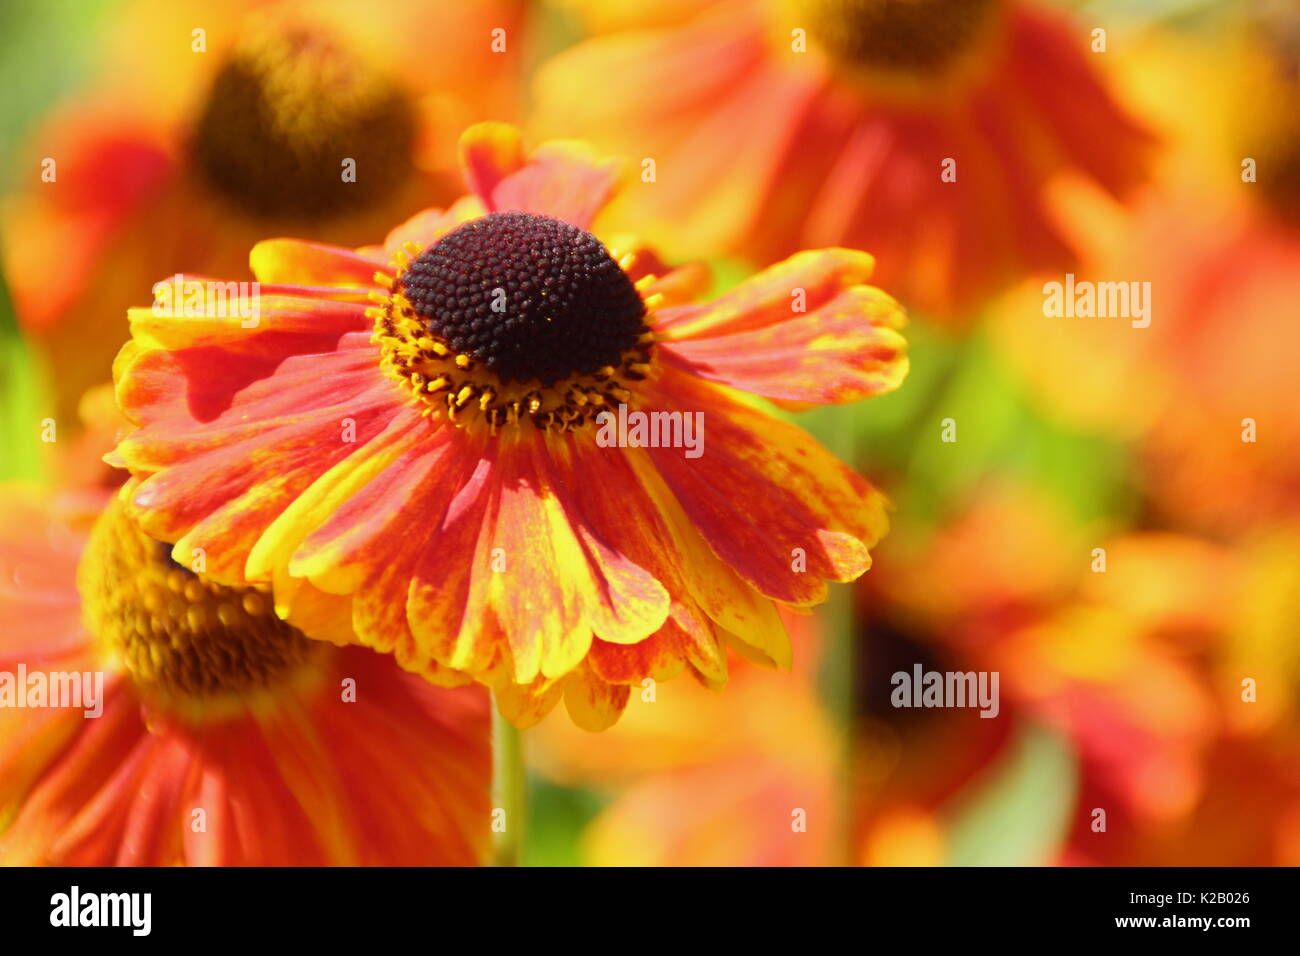 The bronze and orange daisy-like flowers of Helenium 'Waltraut', or Sneezeweed, flowering in the border of an English garden in late summer Stock Photo